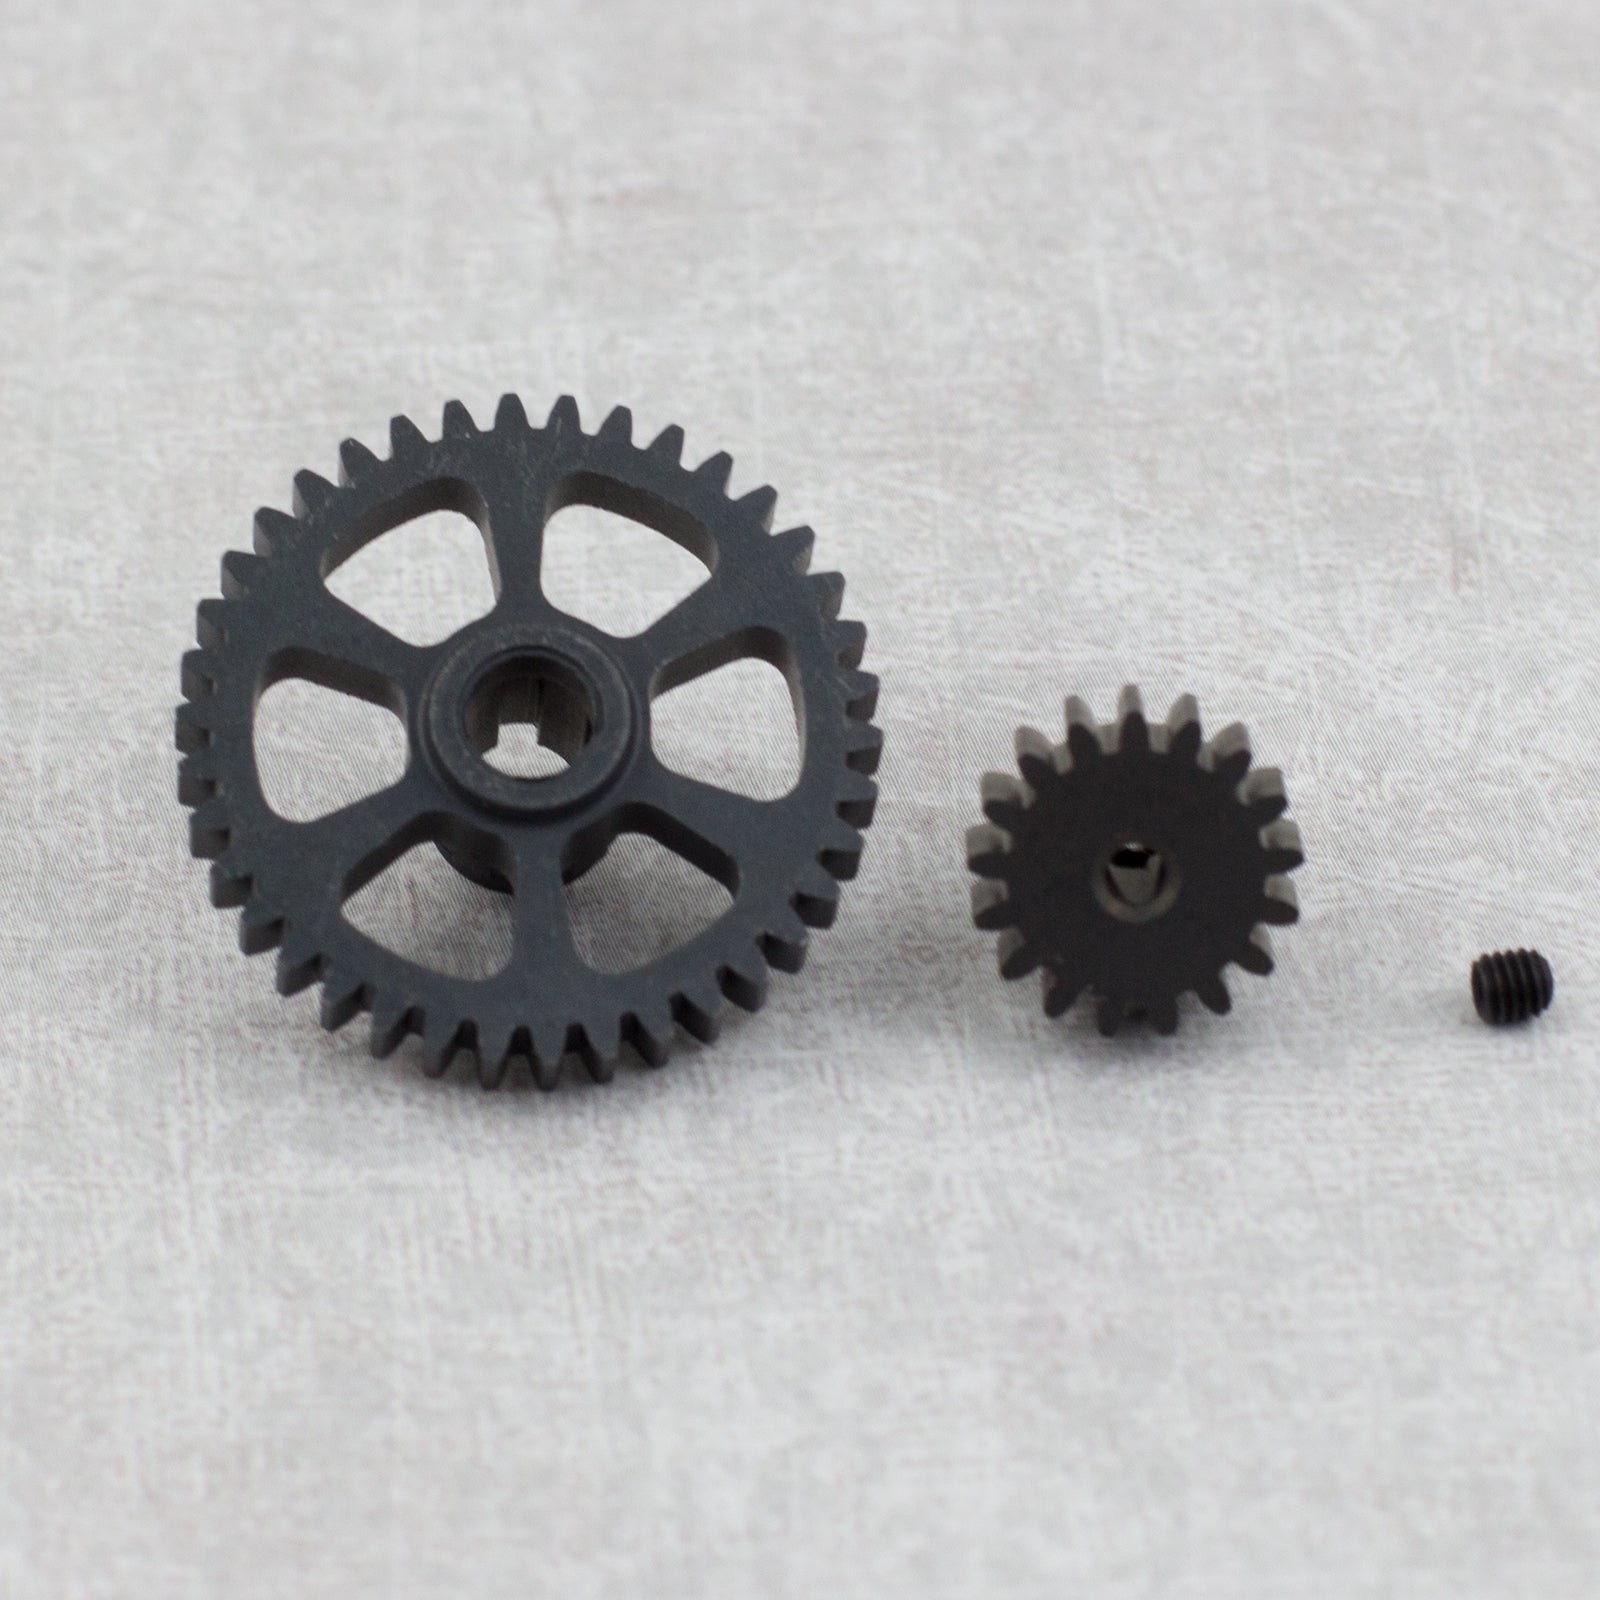 17T Pinion & 38T Reduction Gear Kit for 390 Motor